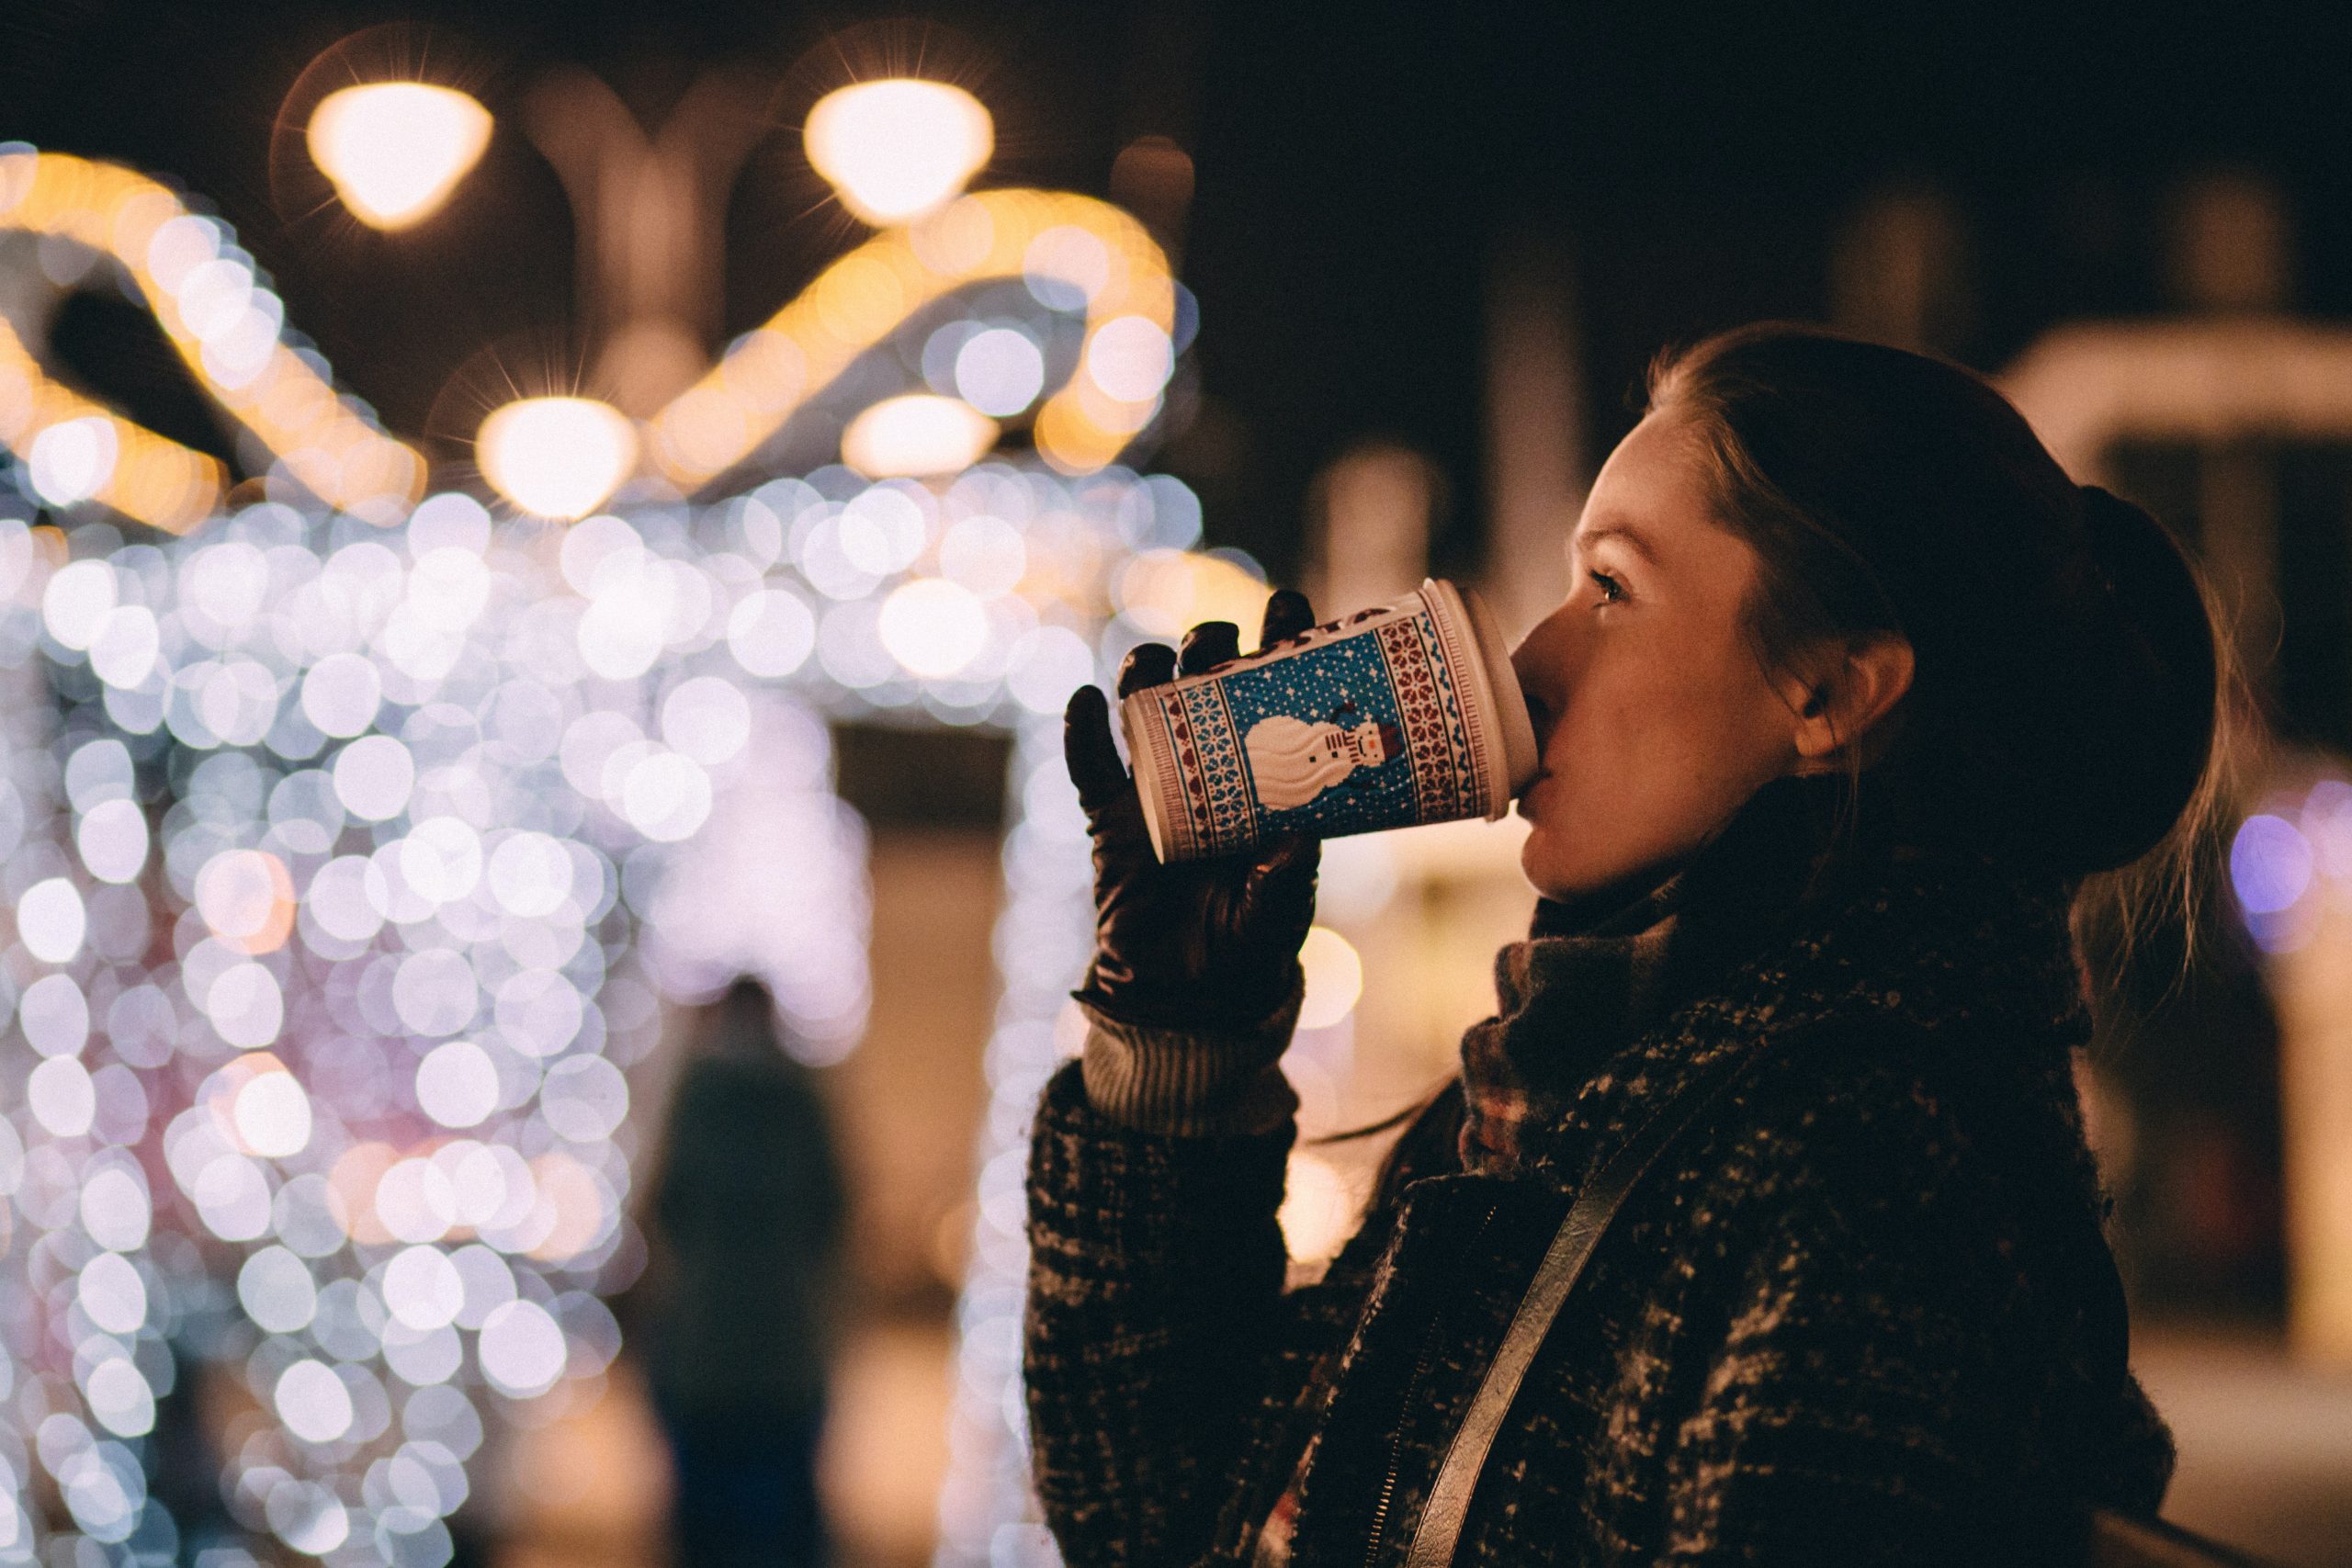 A woman sips a hot drink to stay warm at Kew Gardens's Christmas event